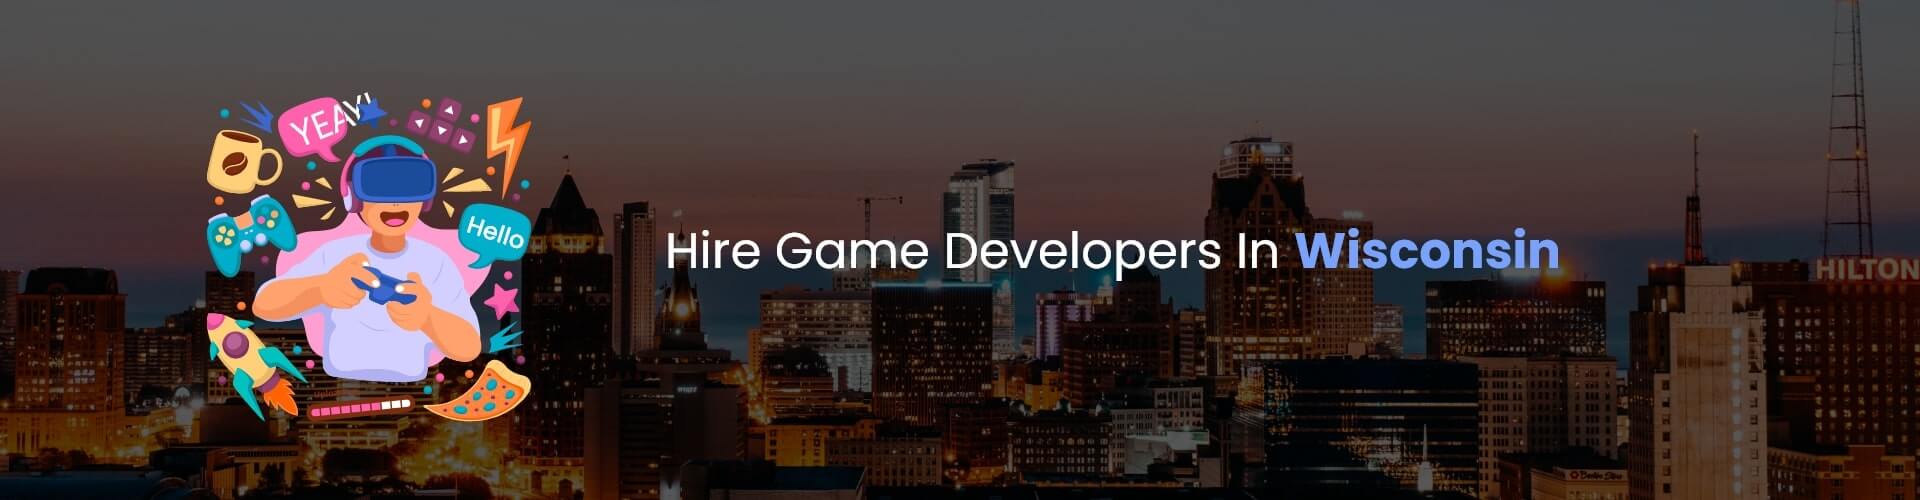 hire game developers in wisconsin